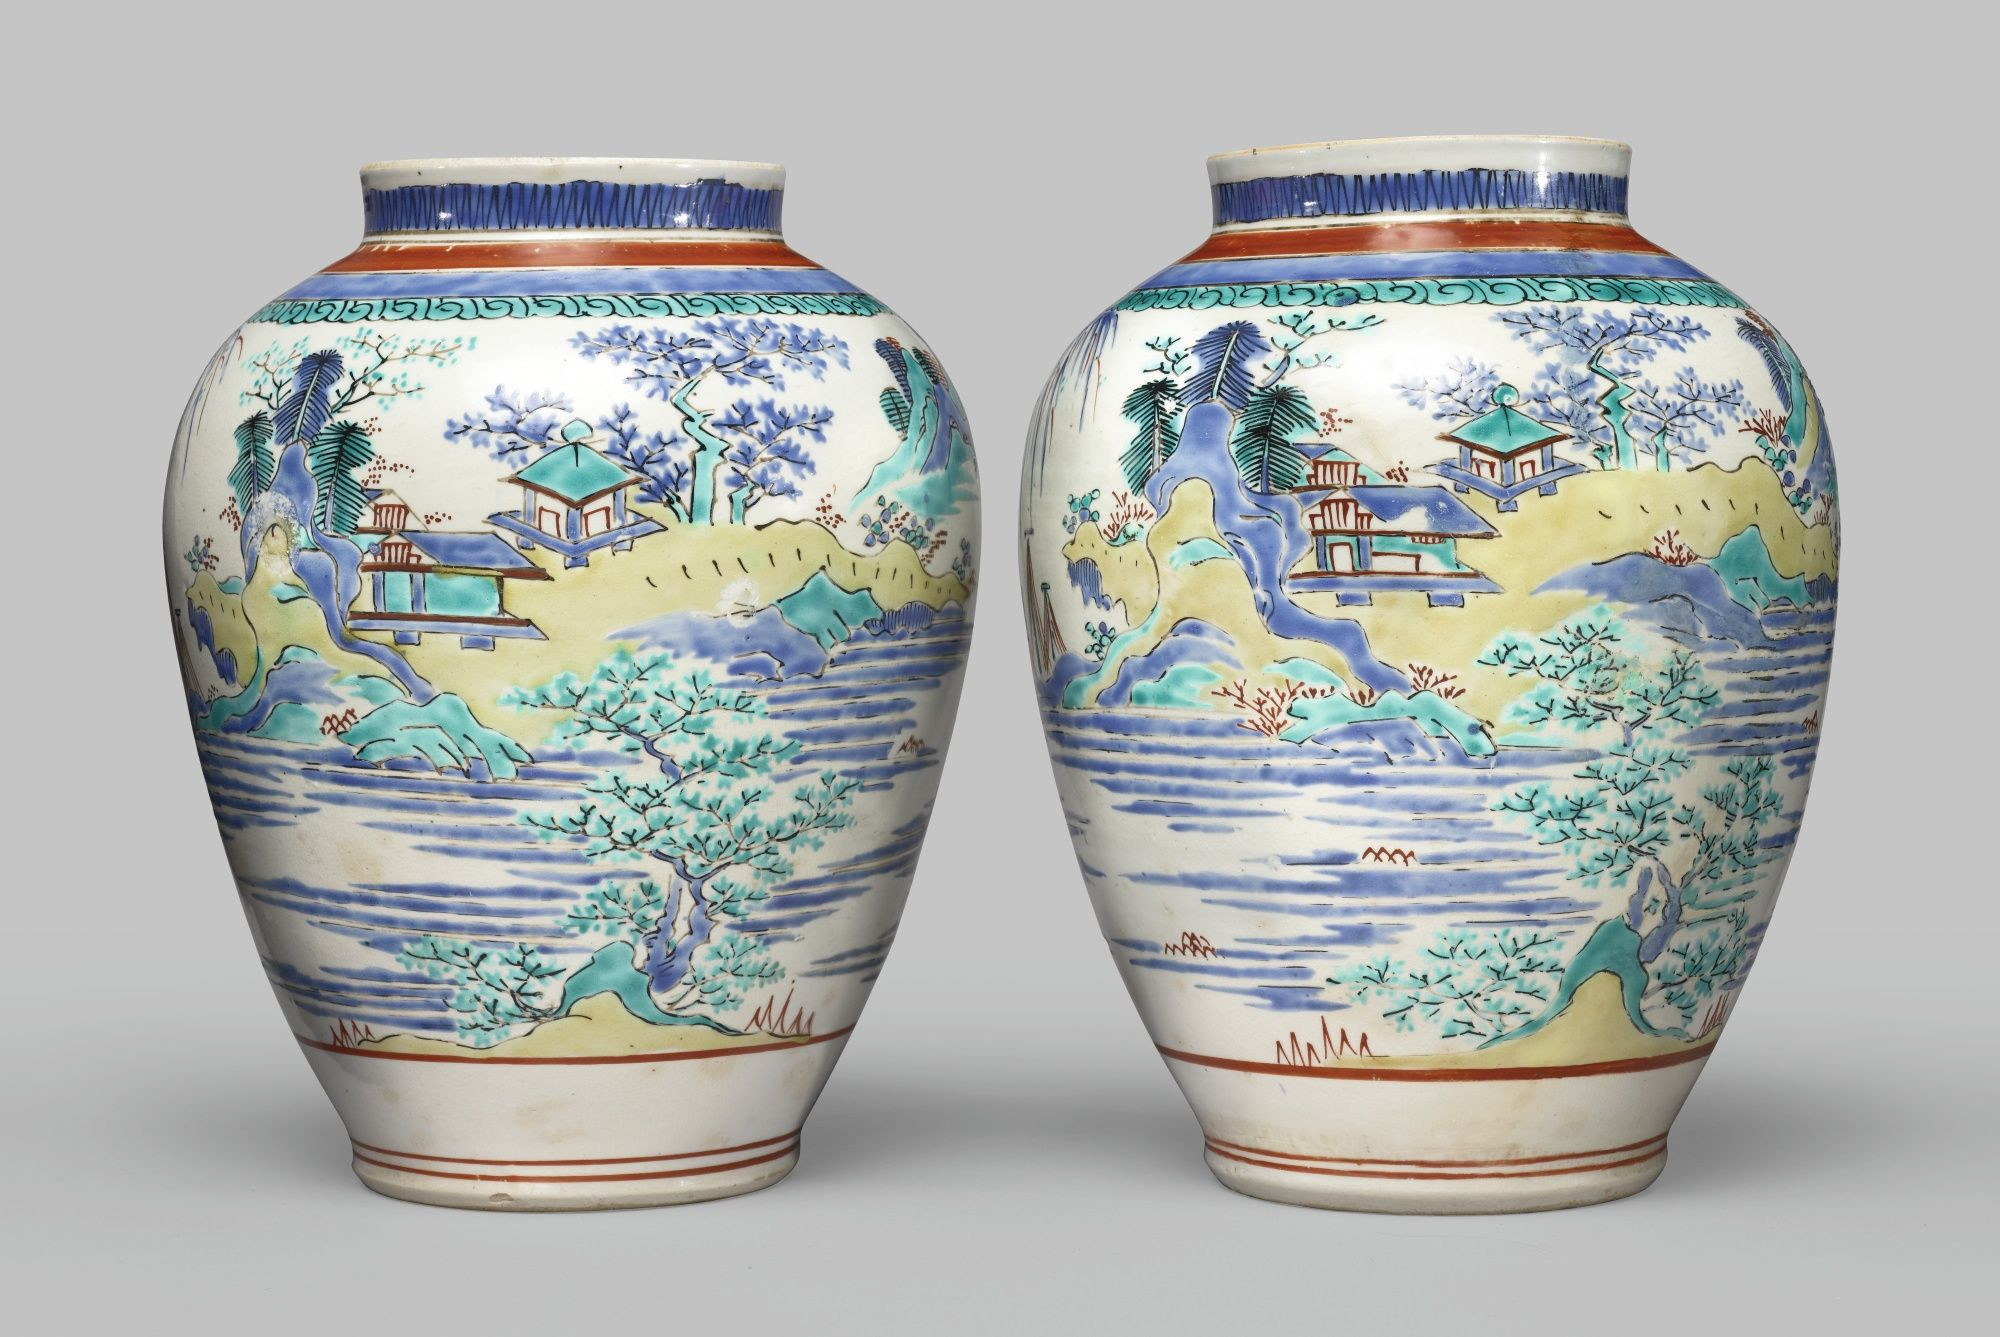 25 Elegant Wedgwood Blue Vase 2024 free download wedgwood blue vase of a pair of large kakiemon vases japan late 17th century each of inside a pair of large kakiemon vases japan late 17th century each of ovoid form decorated in overglazed 